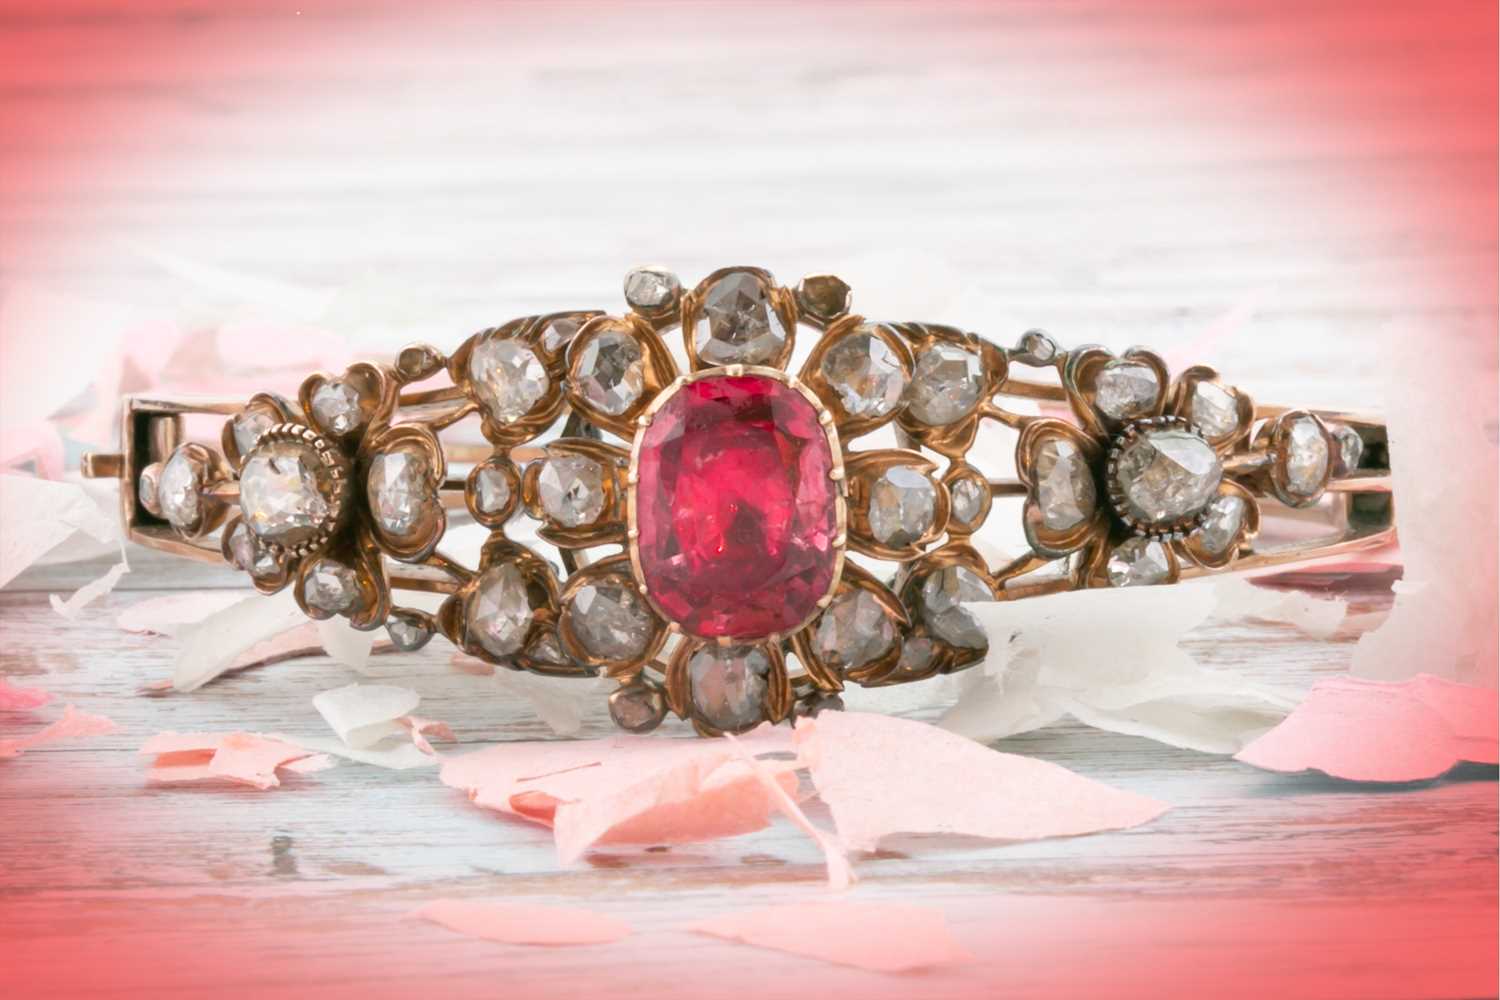 An antique yellow metal and diamond bangle, set with a reddish pink central stone, likely spinel,